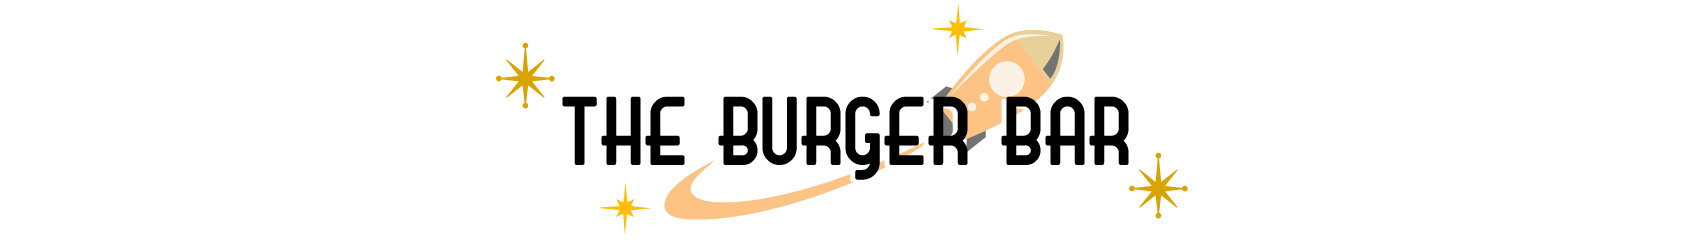 a retro style title The Burger Bar with a flying rocket behind it